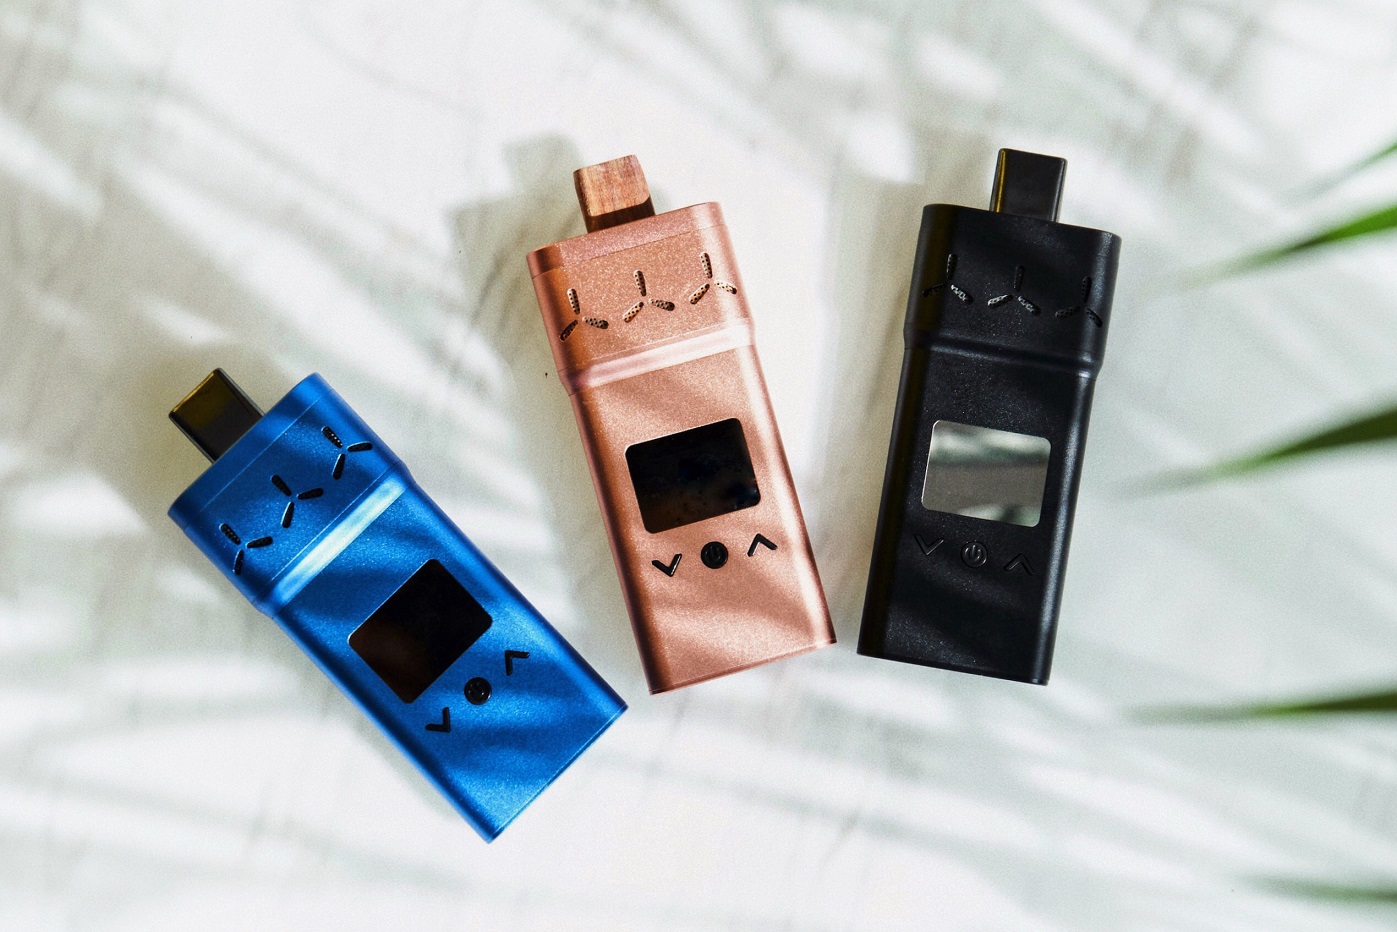 Which is one of the best portable vaporizer are on the market?